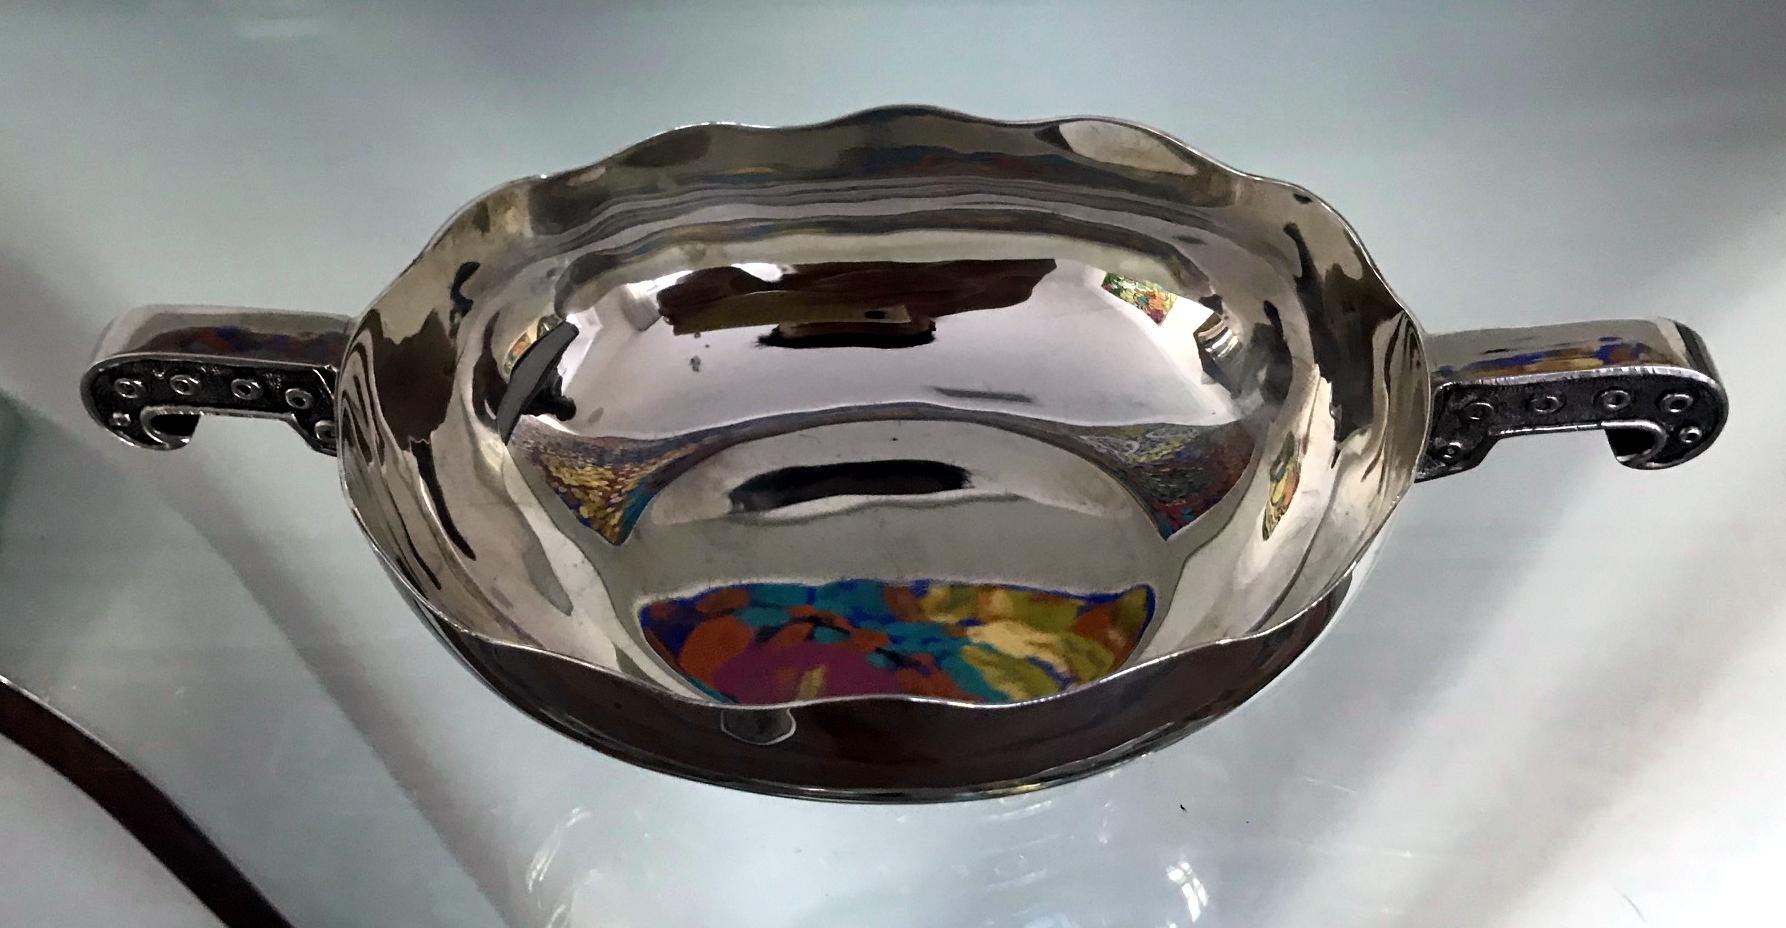 Modern sterling silver footed dish with handles designed and crafted by Tane Orfebres in Mexico. The open dish is decorated with features of the mythical Quetzalcoatl design on the handle and around the base.
Hallmarked to the bottom rim as shown.